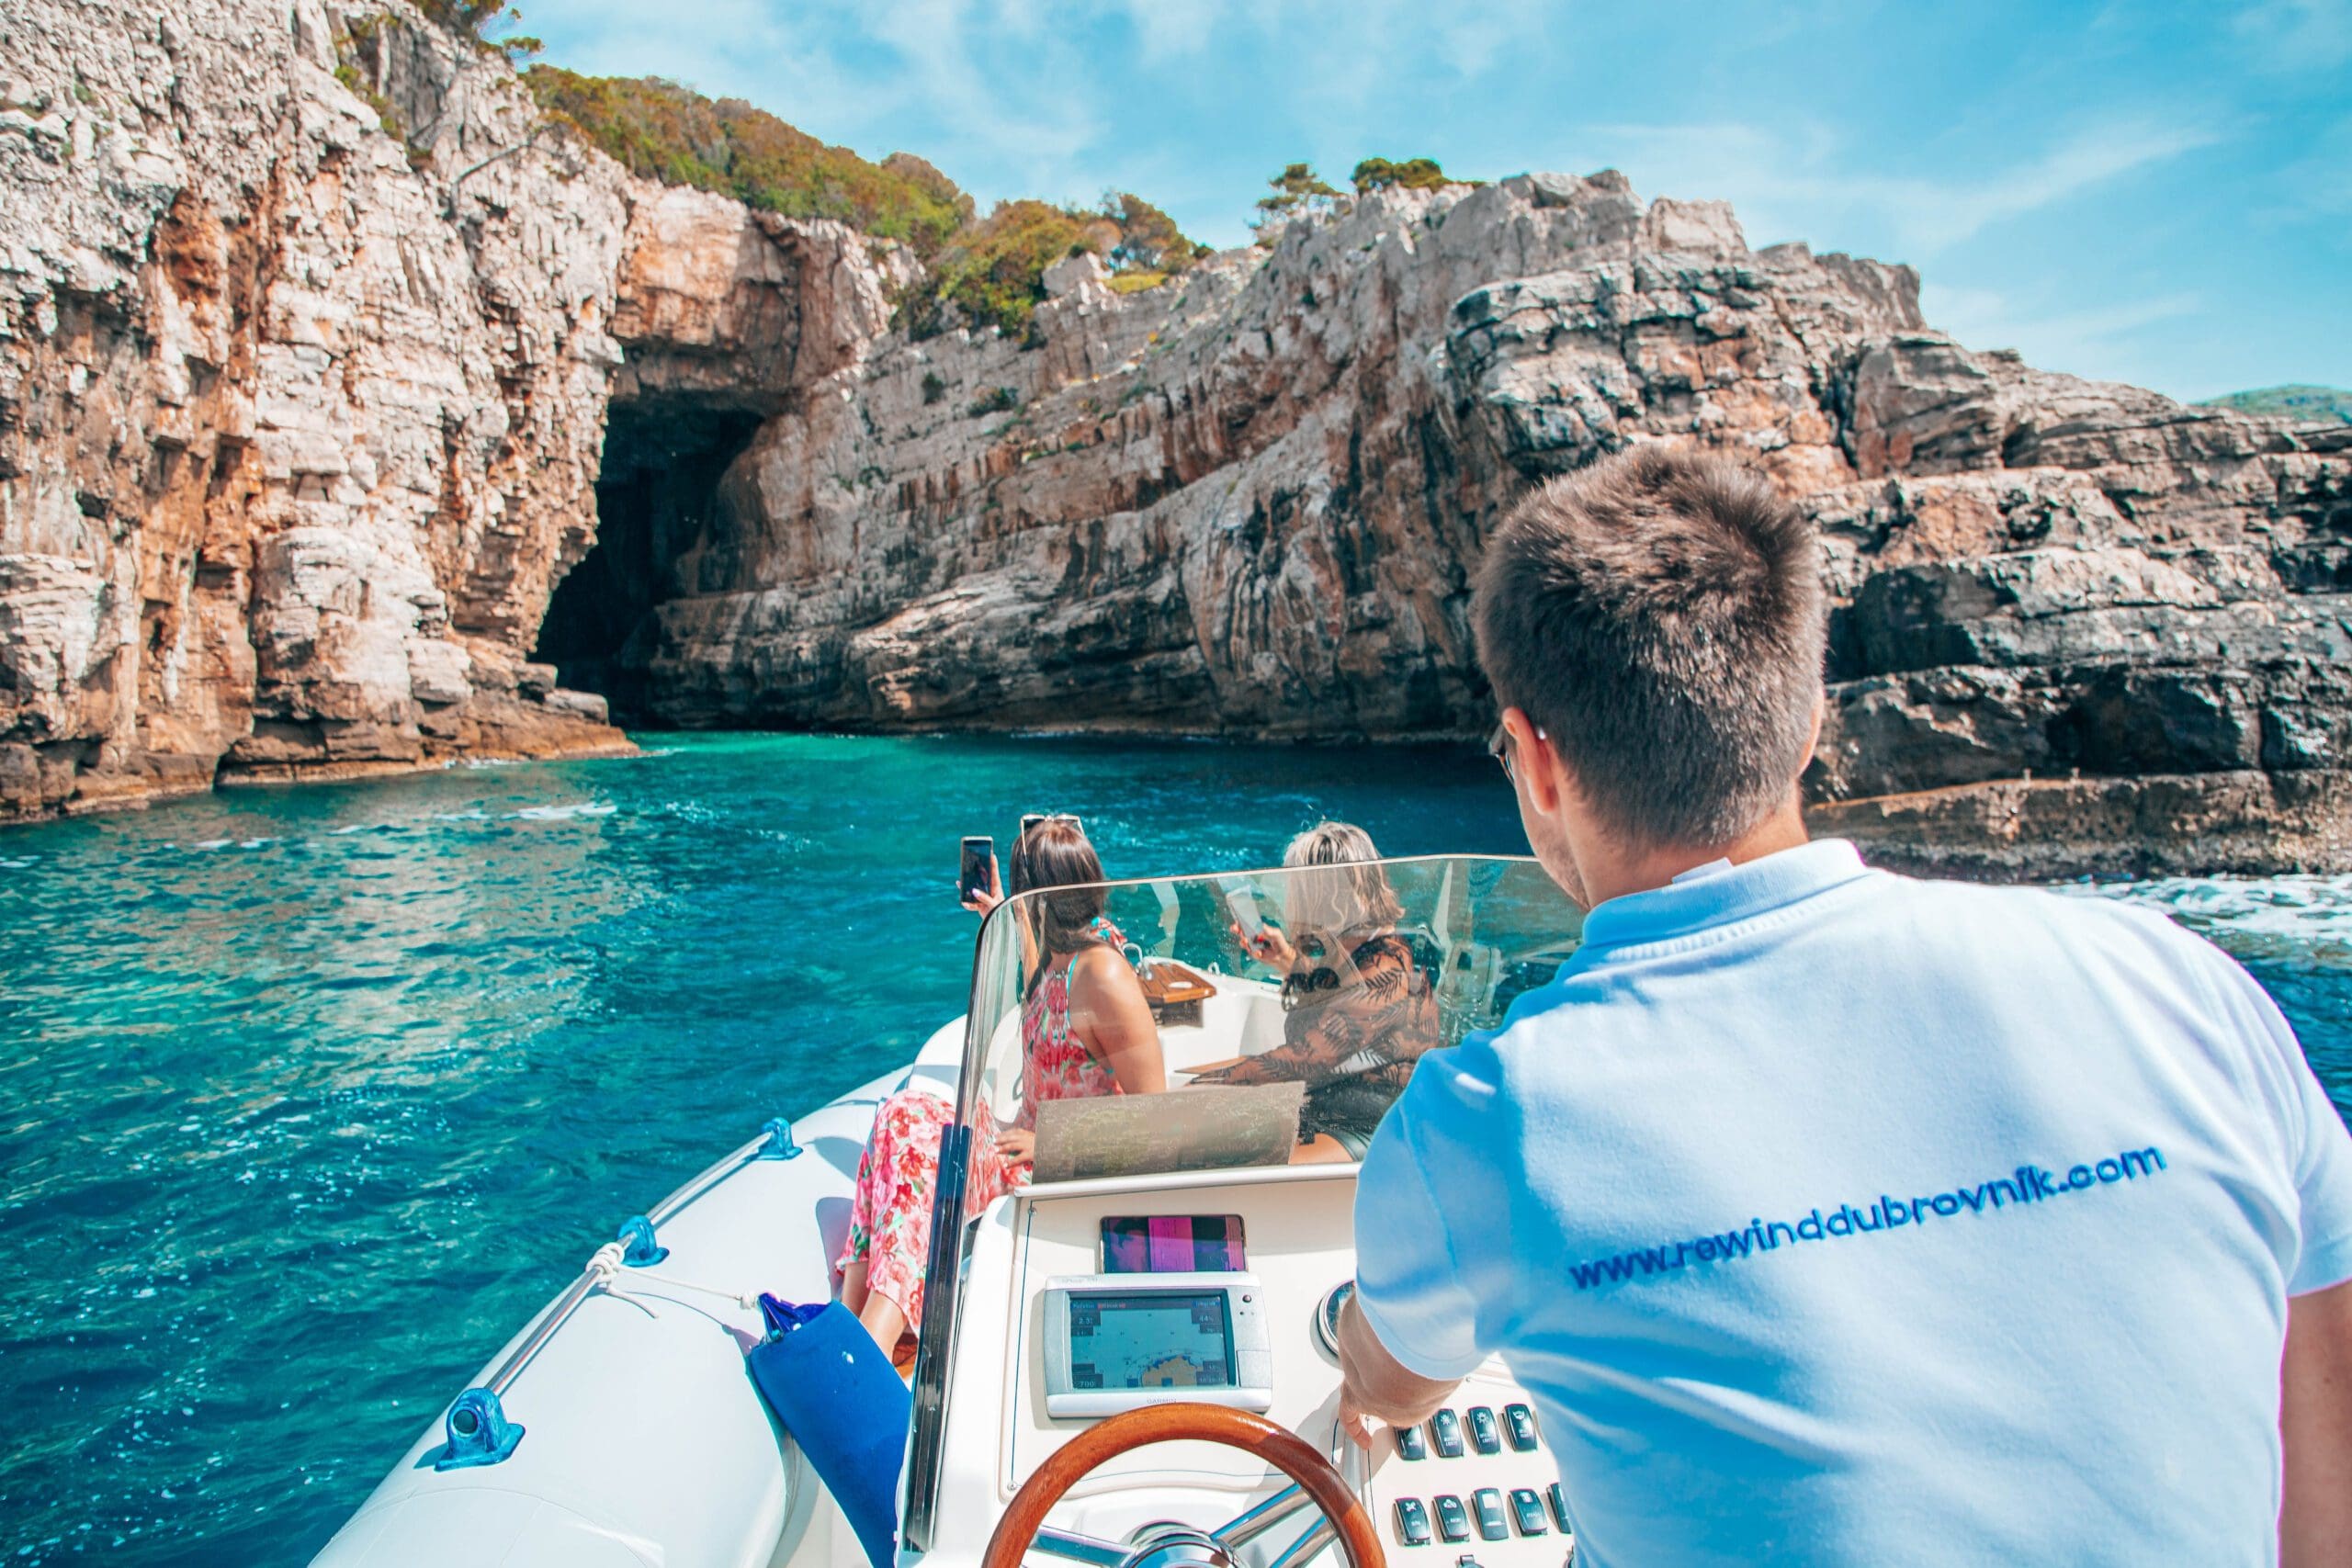 A person navigates a boat with two passengers toward a rocky cave along the turquoise coastline of Dubrovnik, making it an ideal setting for private boat tours.